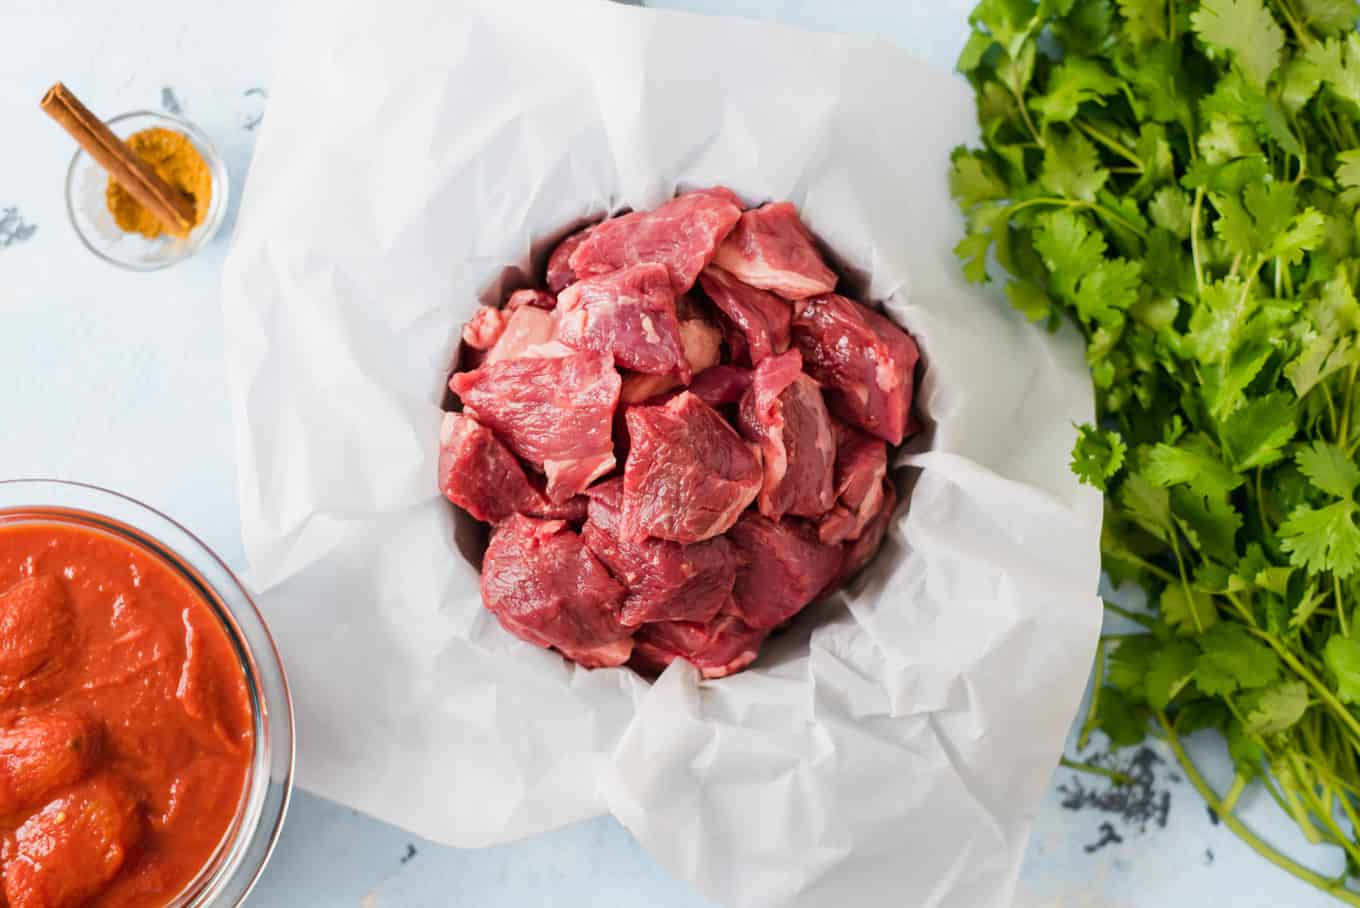 Raw lamb pieces in unwrapped butcher paper.